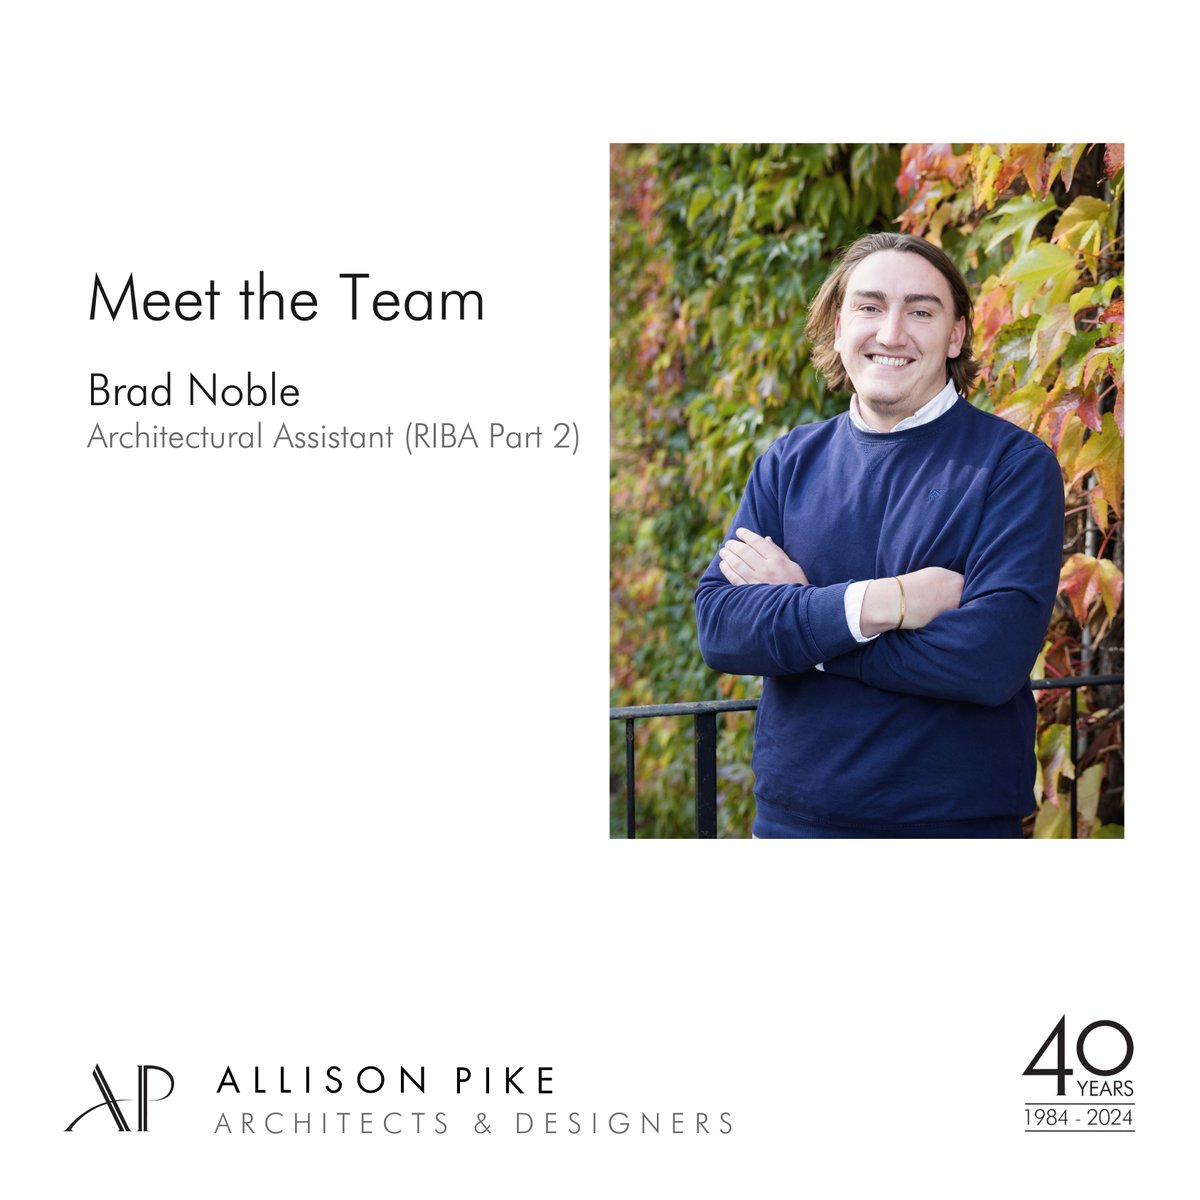 Excited to share that Brad Noble is now a full-time member of our APP team! 🎉 Read more about Brad's journey and achievements on our LinkedIn: linkedin.com/company/alliso…

 #TeamAPP